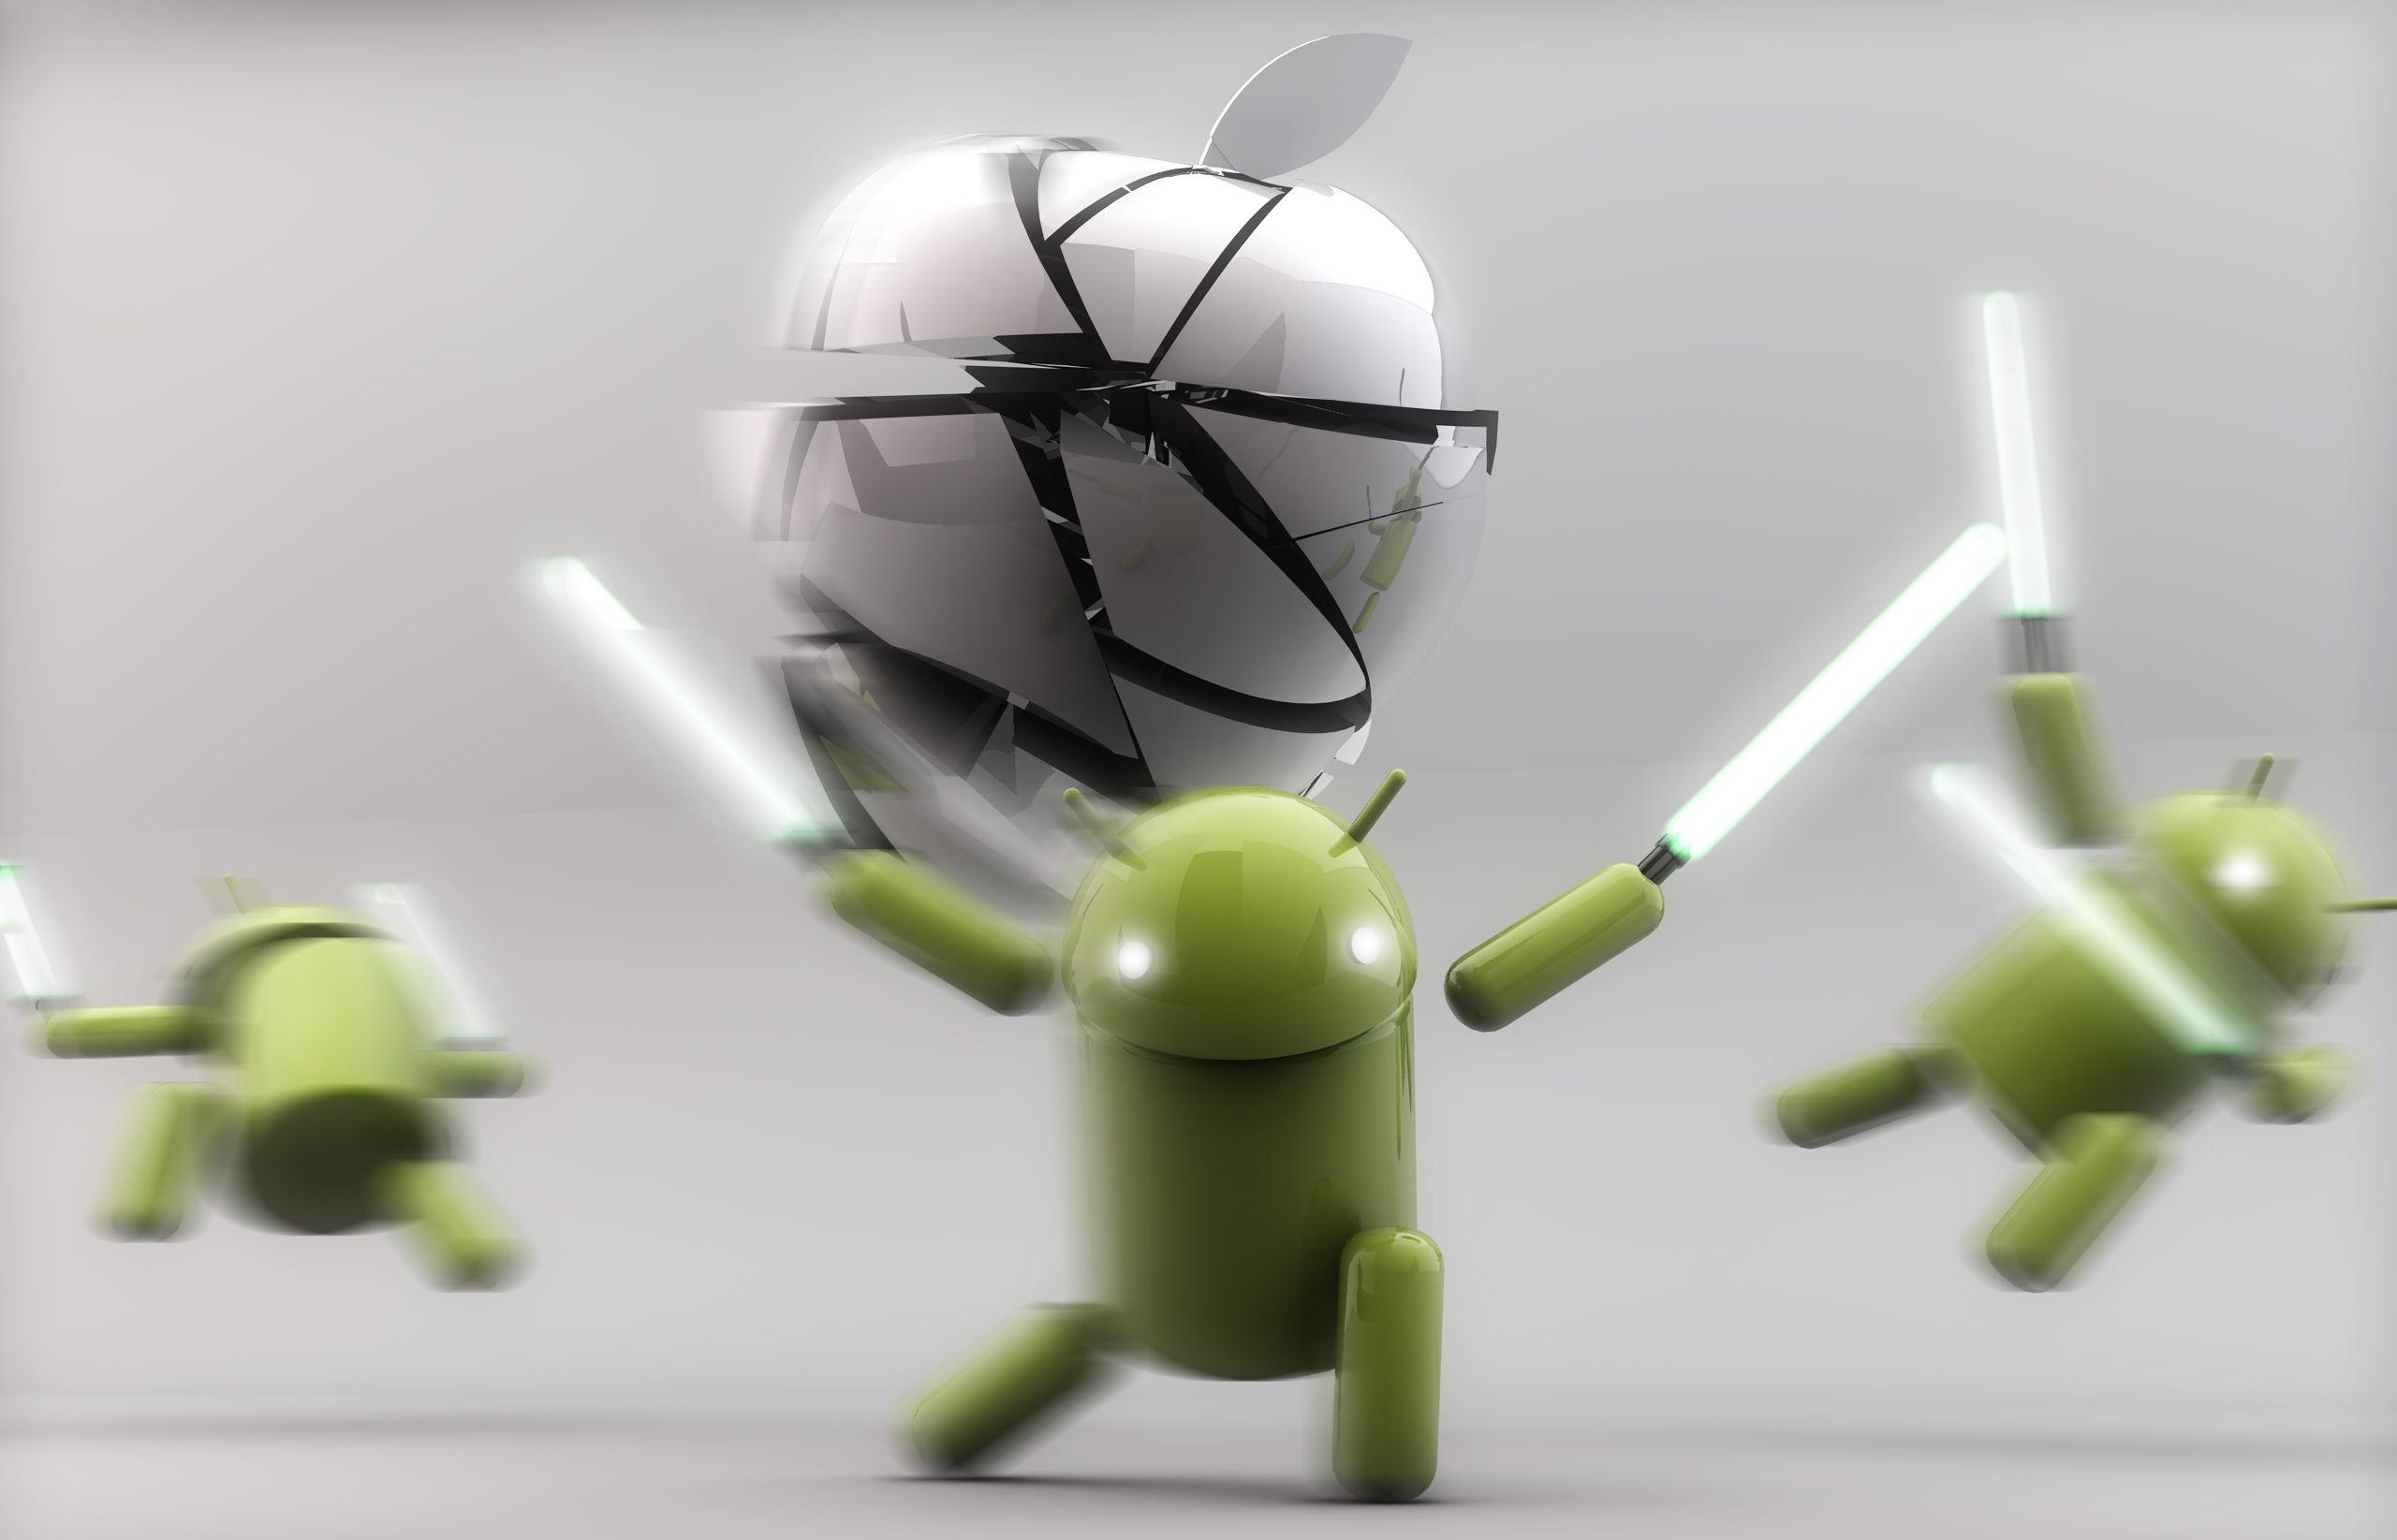 Tech Background In High Quality: Apple Vs Android